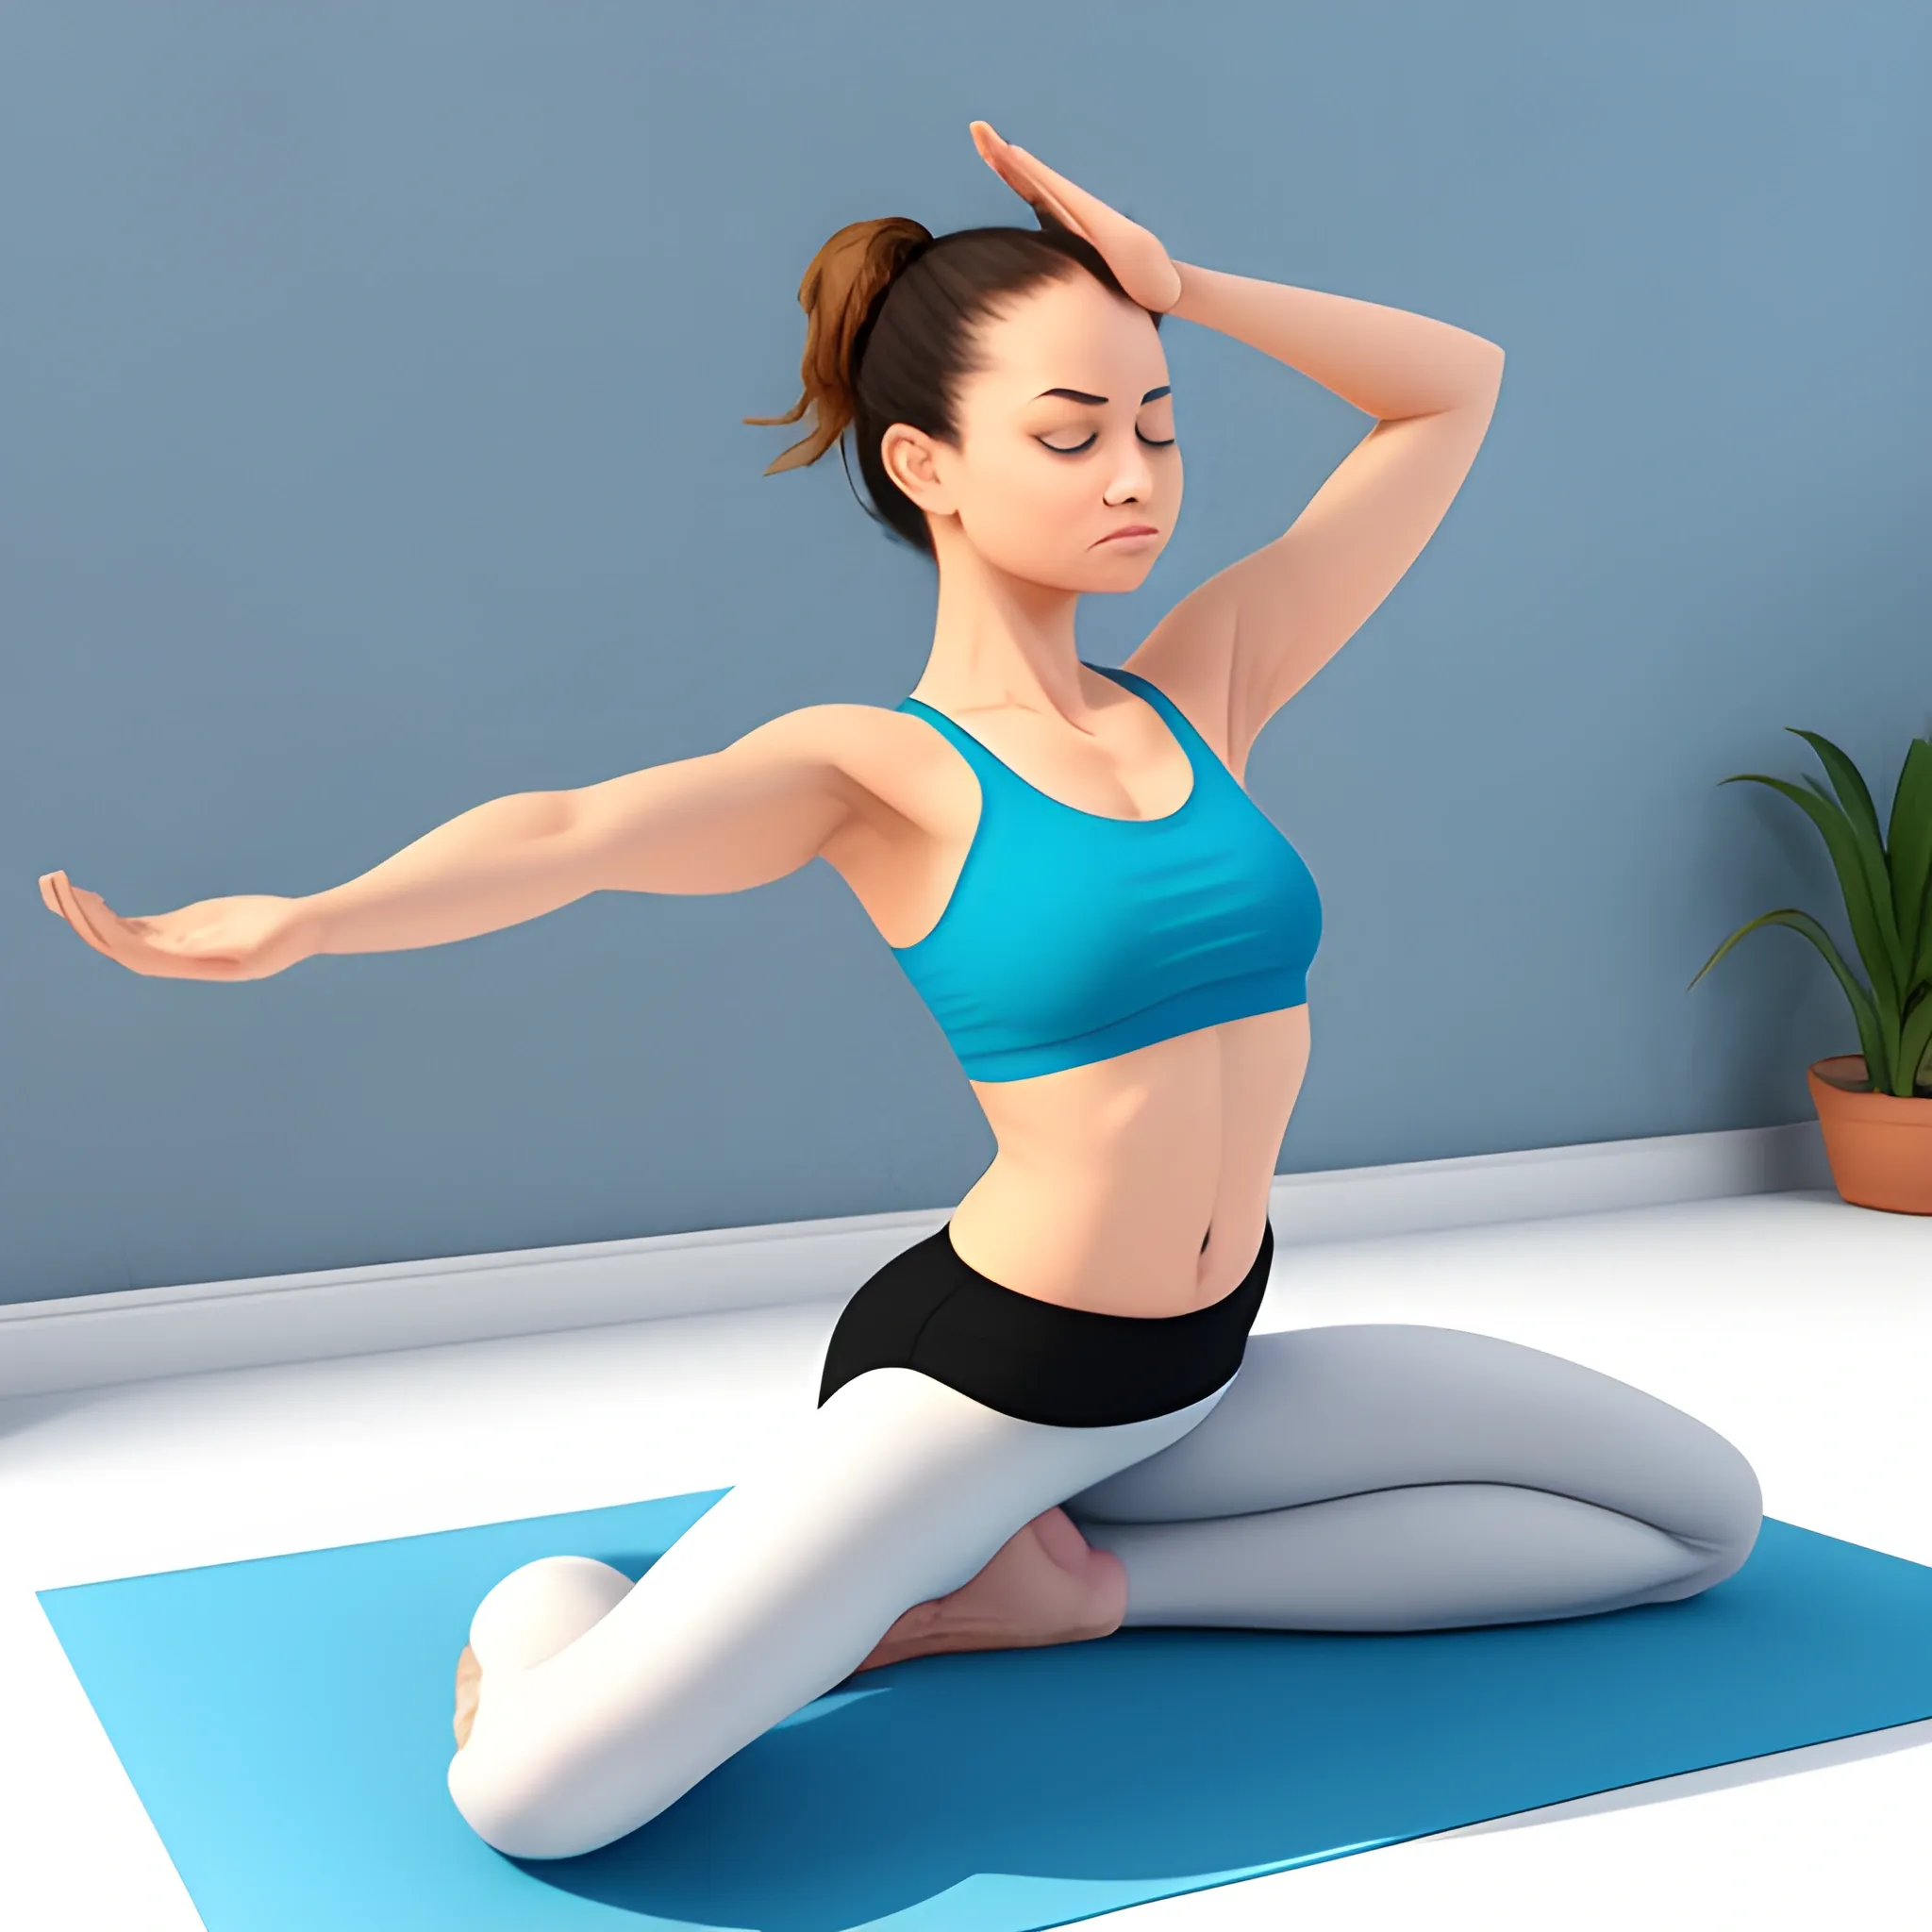 Yoga Poses For Three People | 3d-mon.com